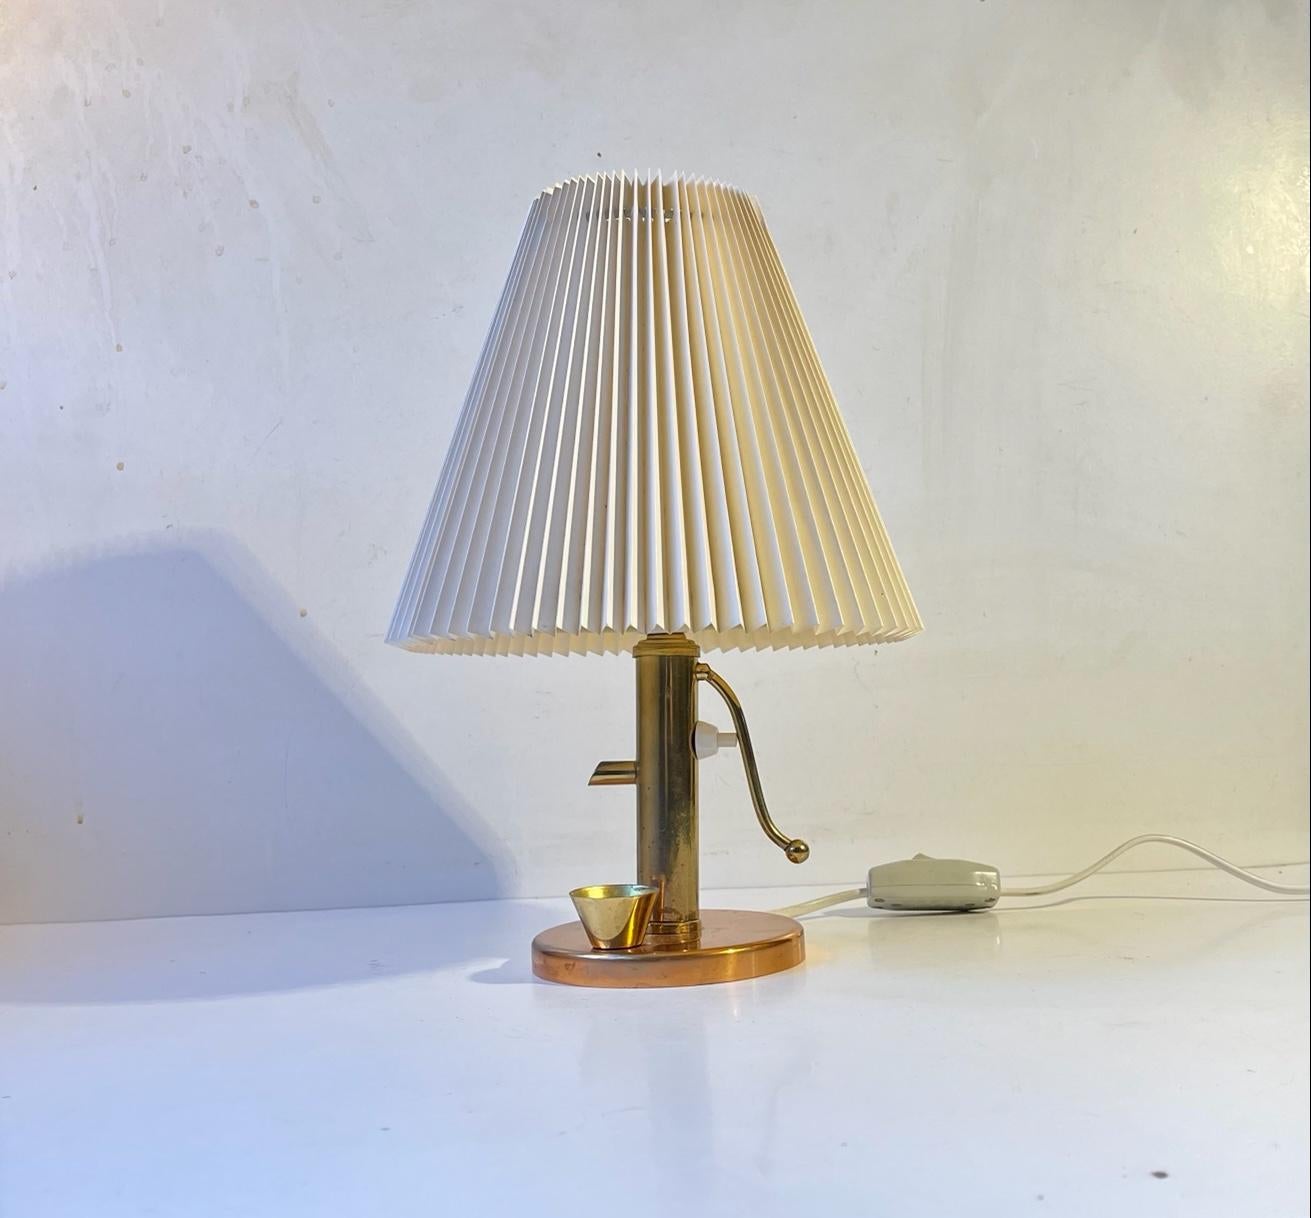 Romantic Novelty. Elegantly crafted water pump table lamp with pleaded shade. Its made from solid copper and brass. Made in Denmark during the 1960s. Measurements: Height: 31 cm, Diameter: 21 cm (shade).